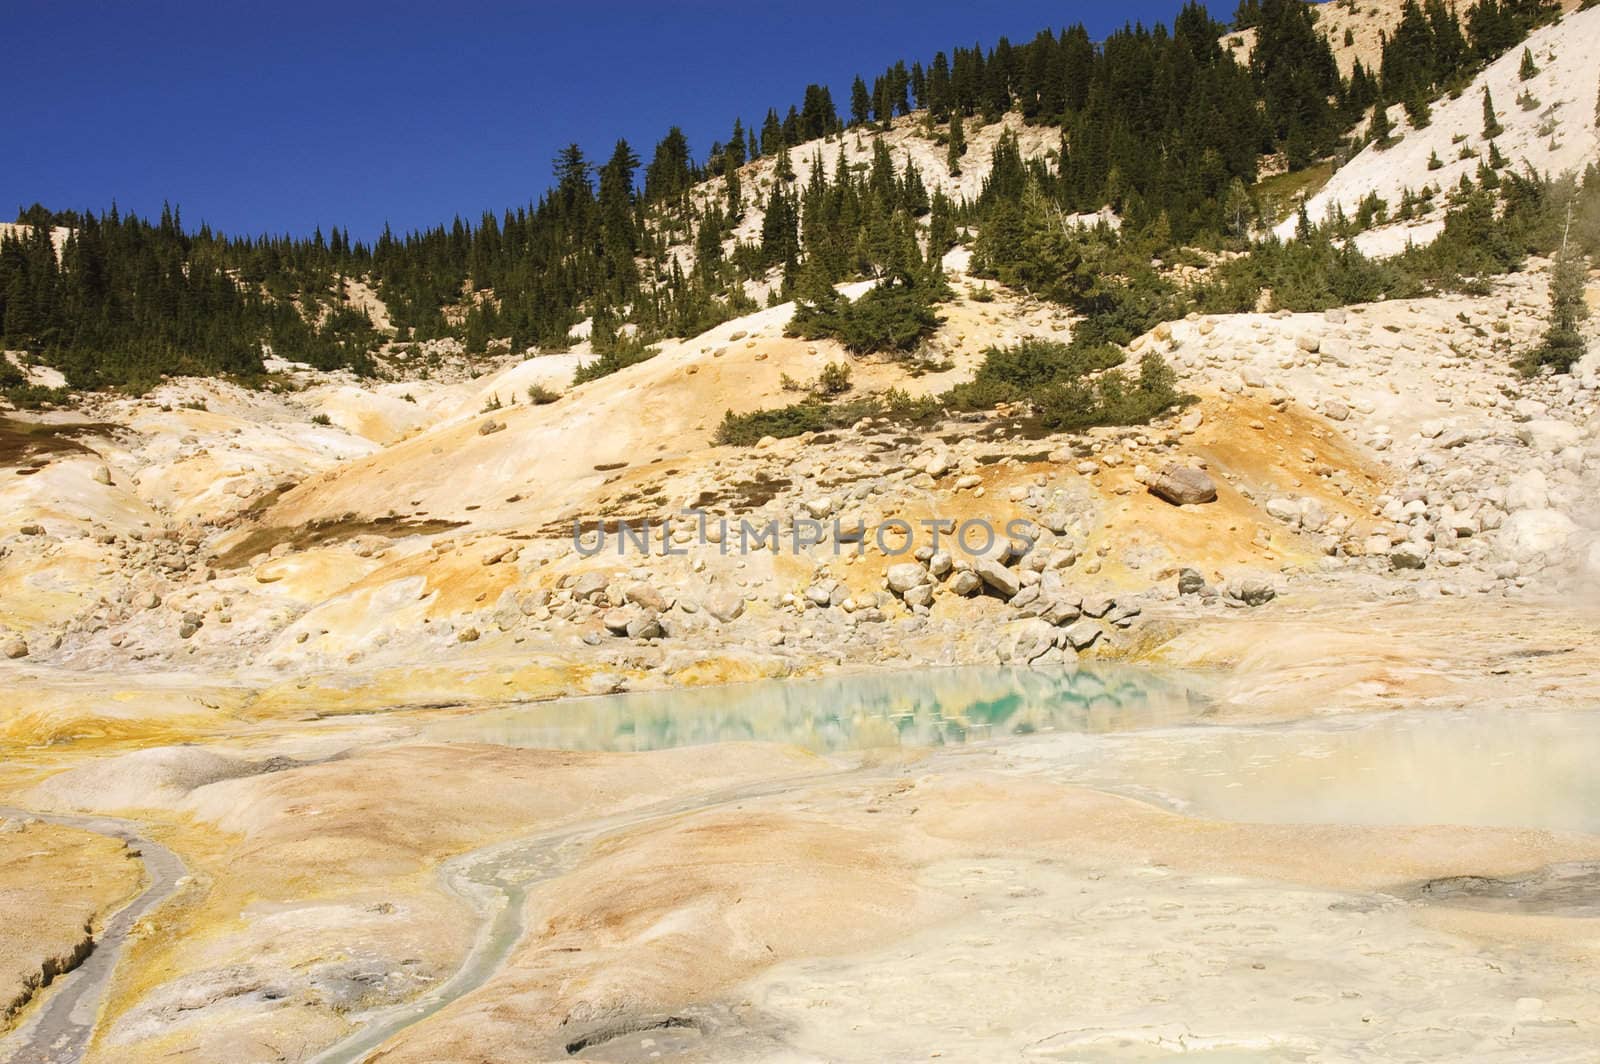 Mount Lassen sulpher pools and mud baths in northern California